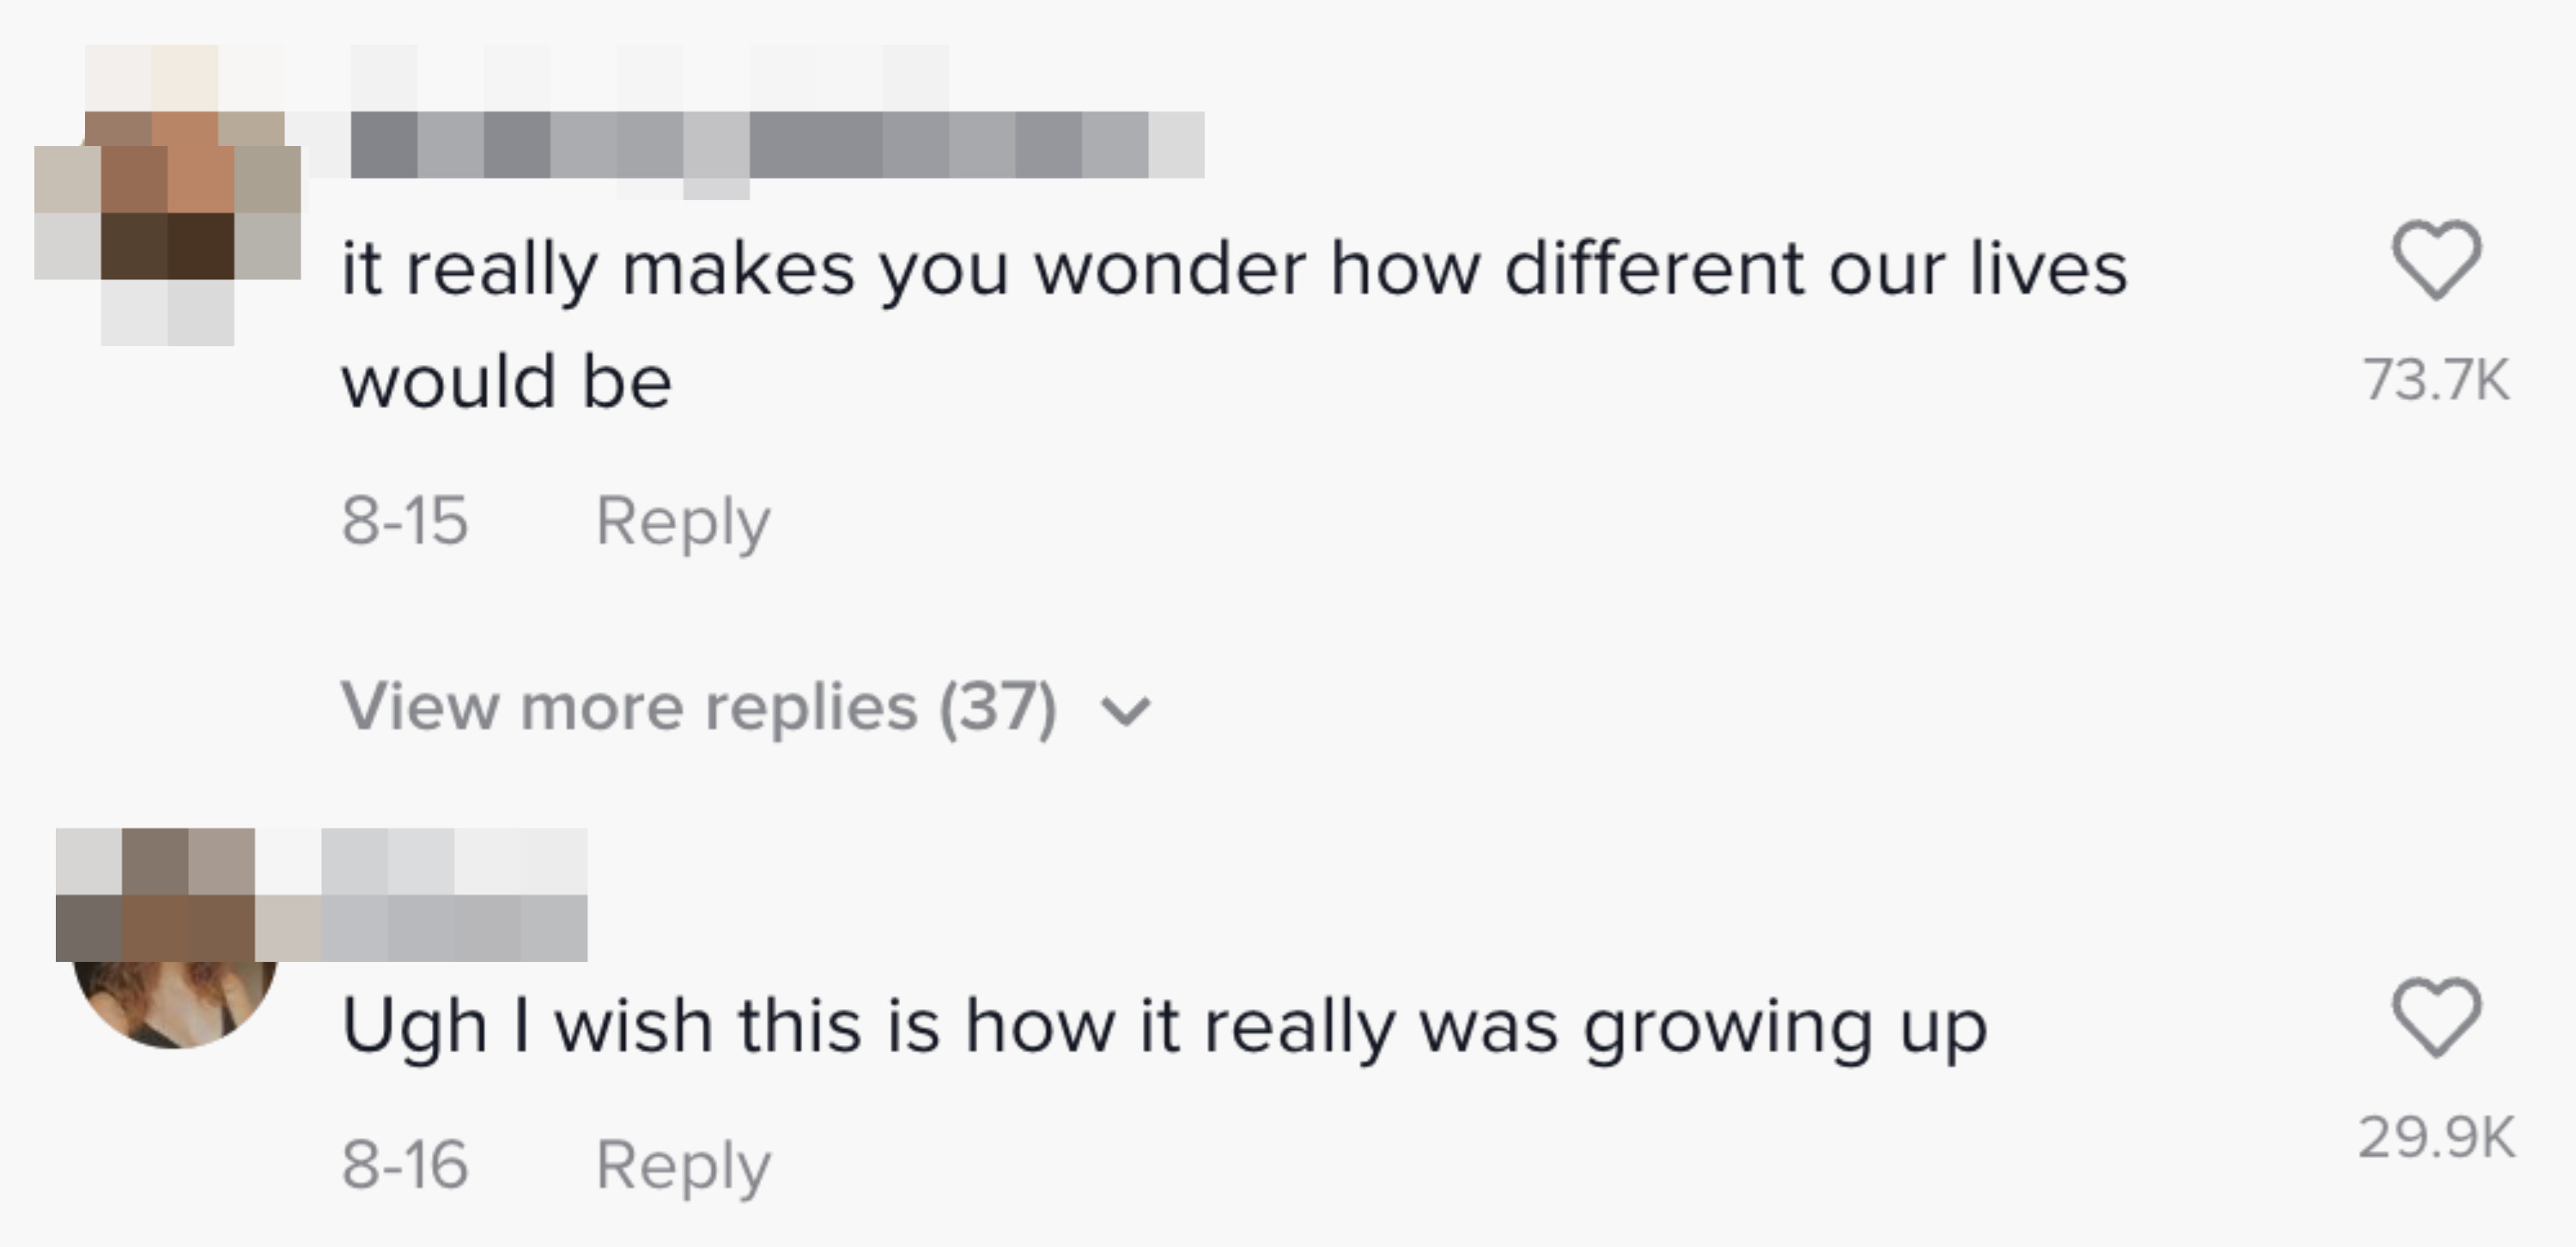 Comments &quot;It really makes you wonder how different our lives would be&quot; and &quot;Ugh I wish this is how it really was growing up&quot;